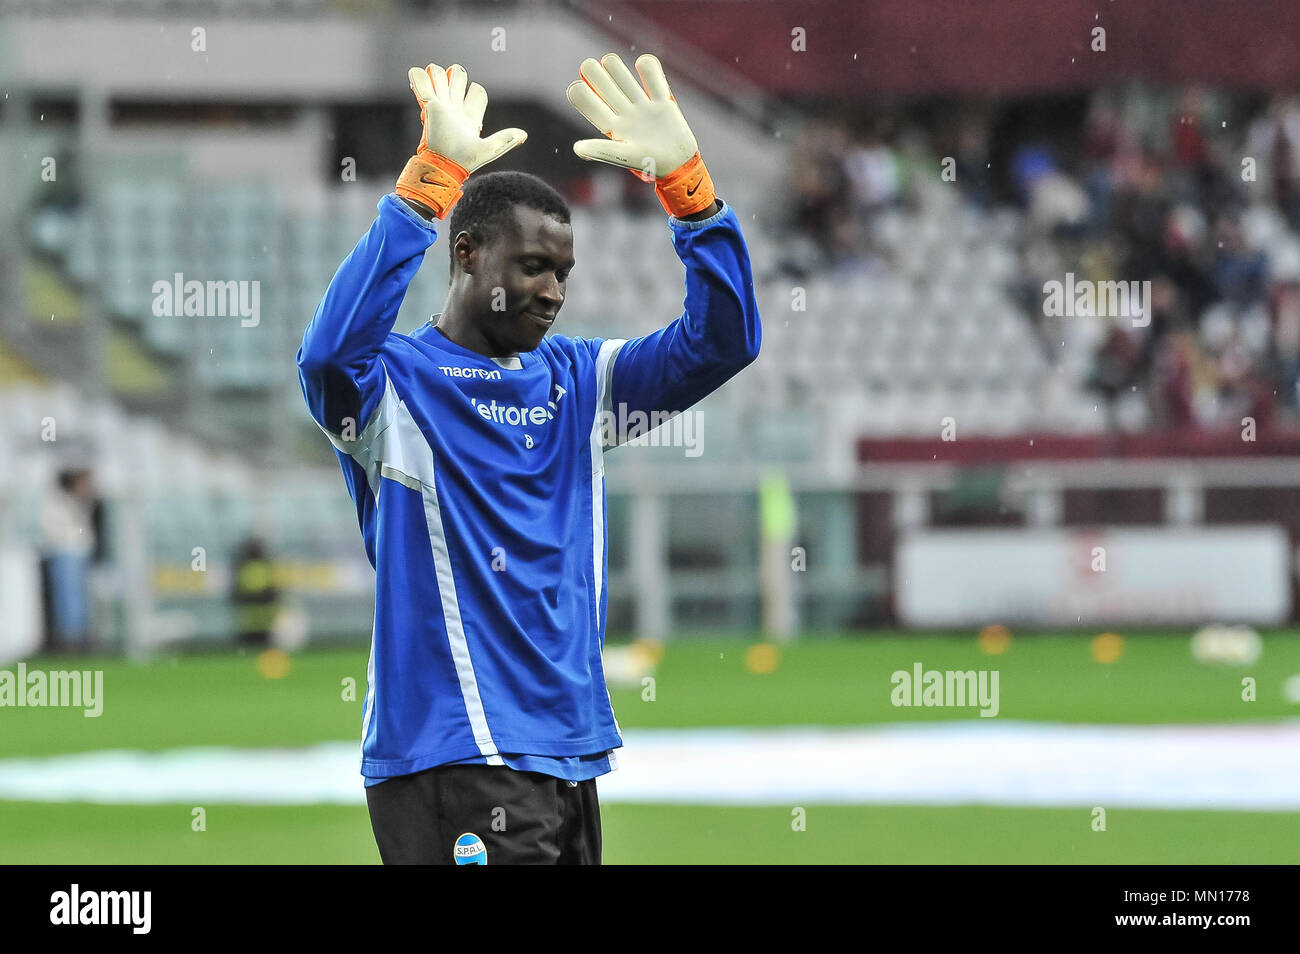 Torino, Italy. 13th May, 2018. Alfred Gomis (SPAL) during the Serie A football match between Torino FC and SPAL at Stadio Grande Torino on 13th May, 2018 in Turin, Italy. Credit: FABIO PETROSINO/Alamy Live News Stock Photo